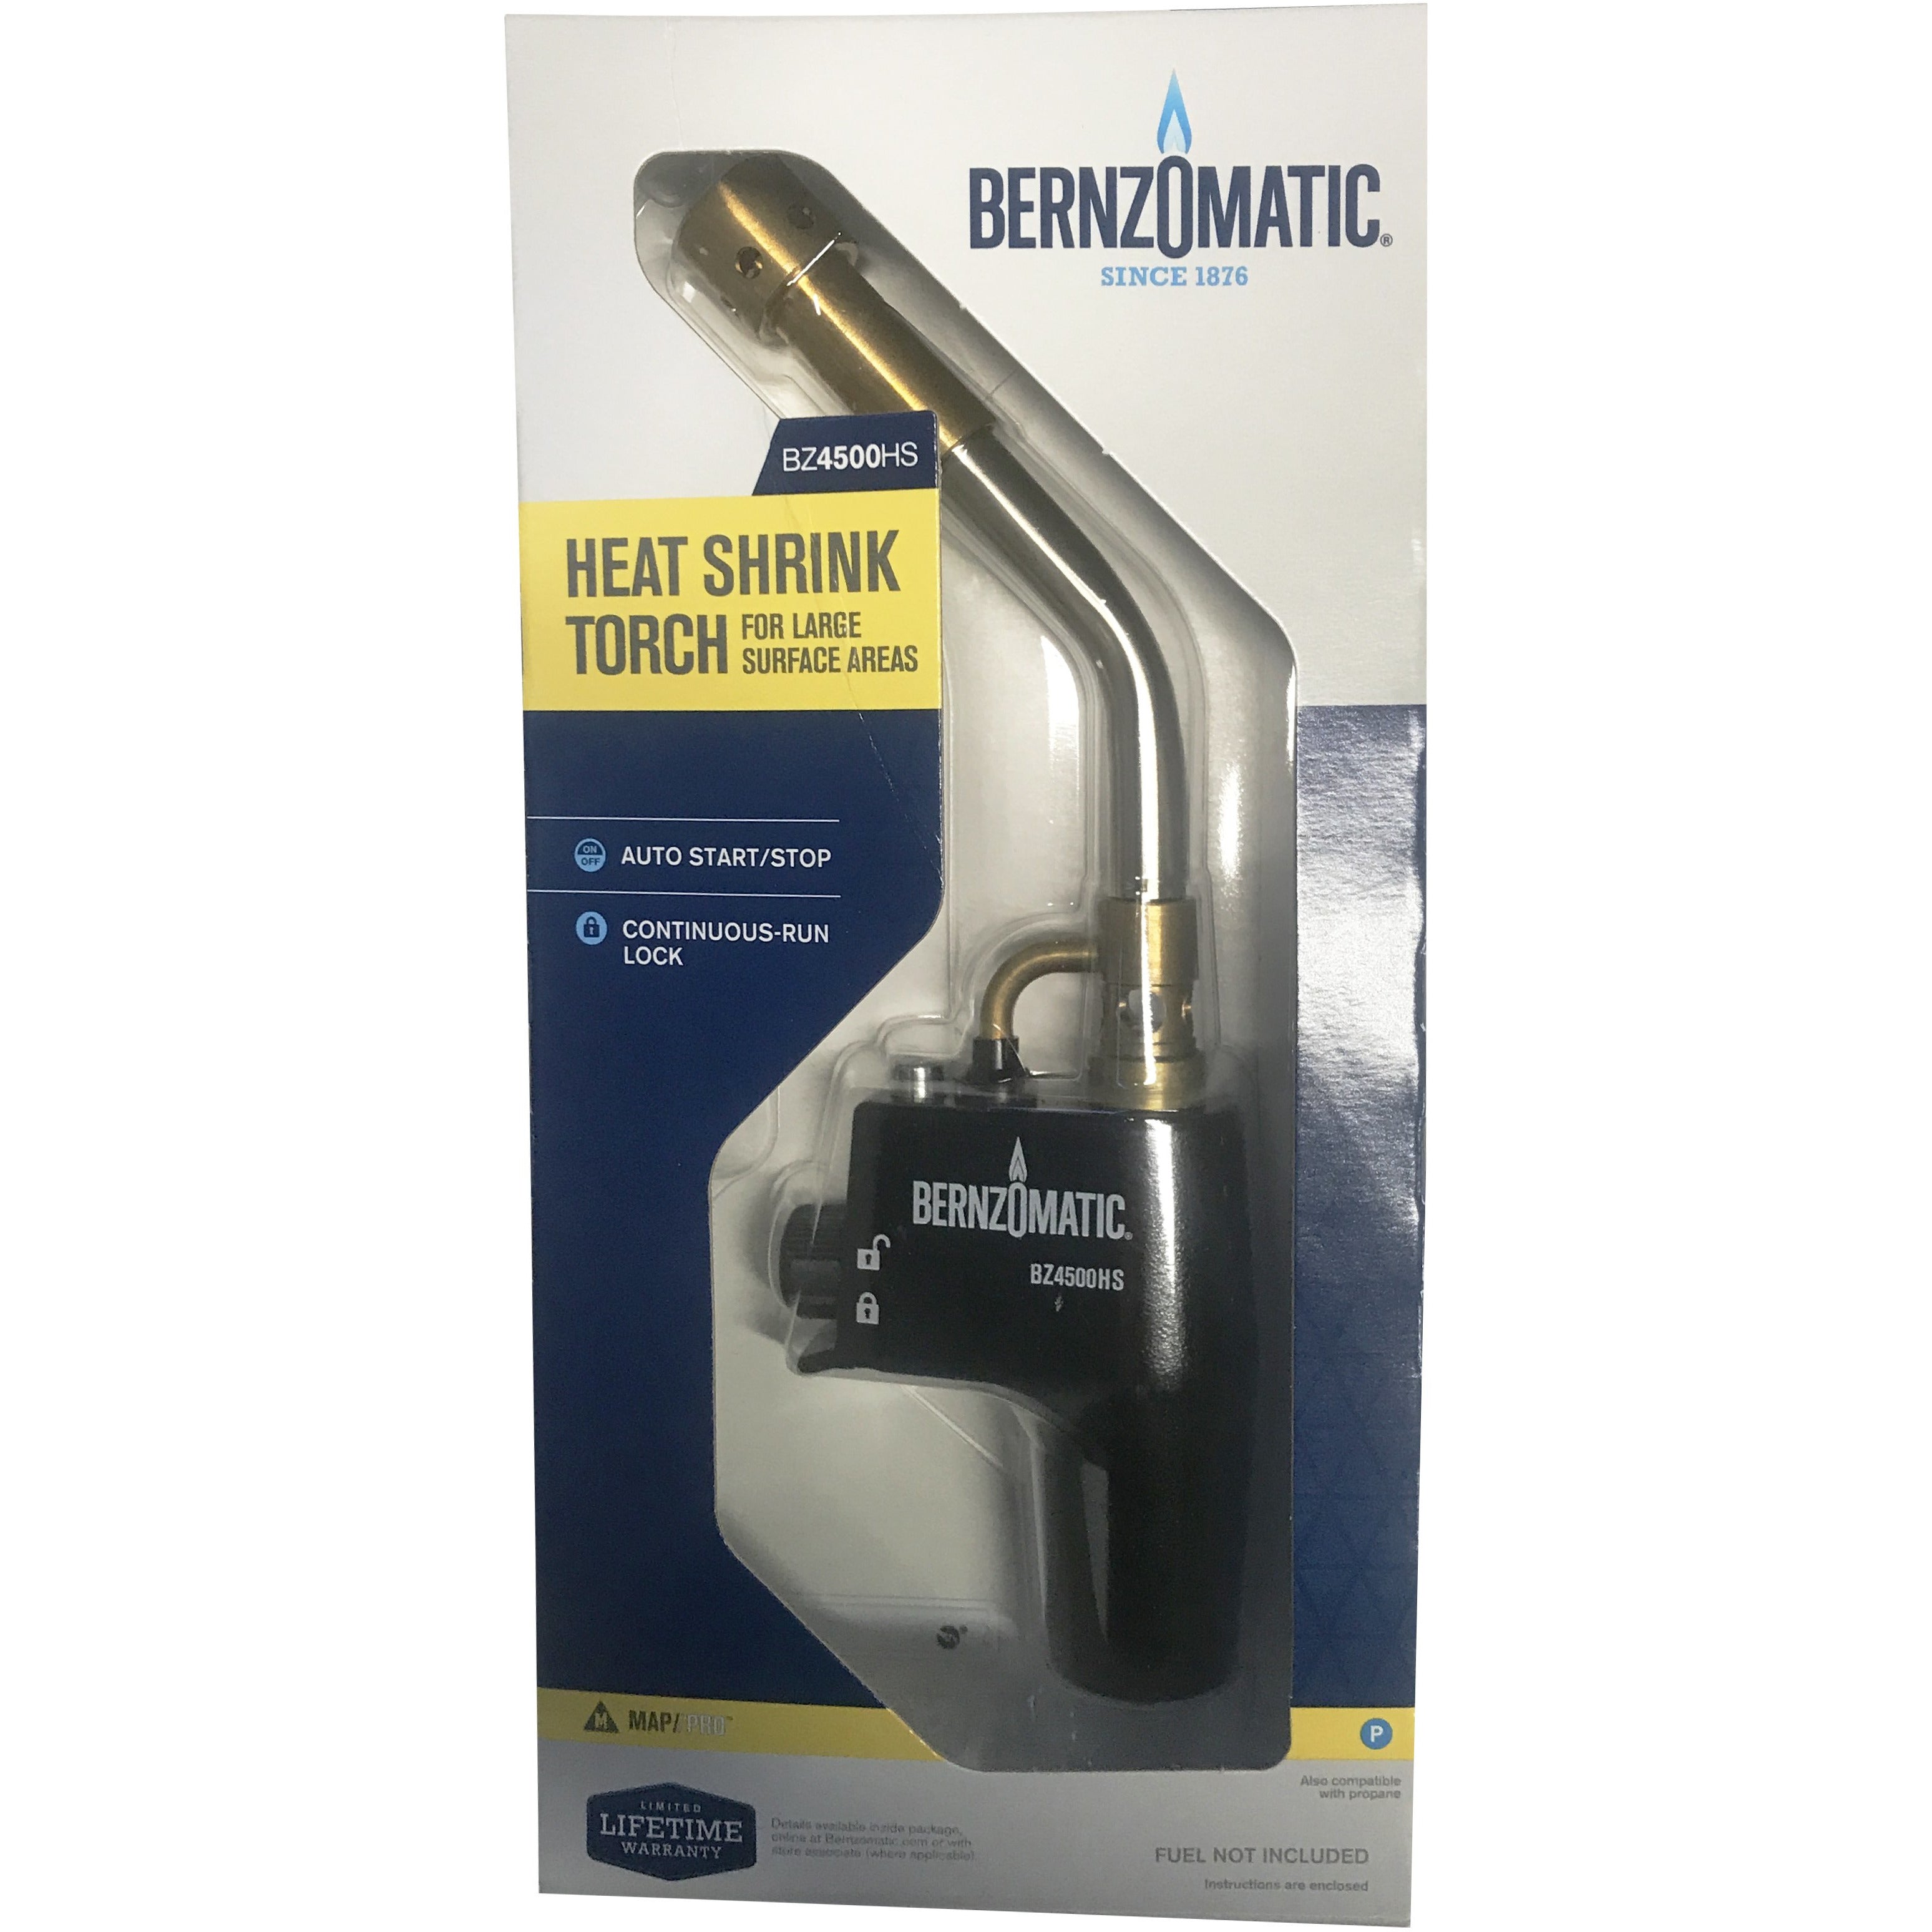 BernzOmatic Trigger Start Gas Torch Heat Shrink-Gas Tools & Accessories-Tool Factory